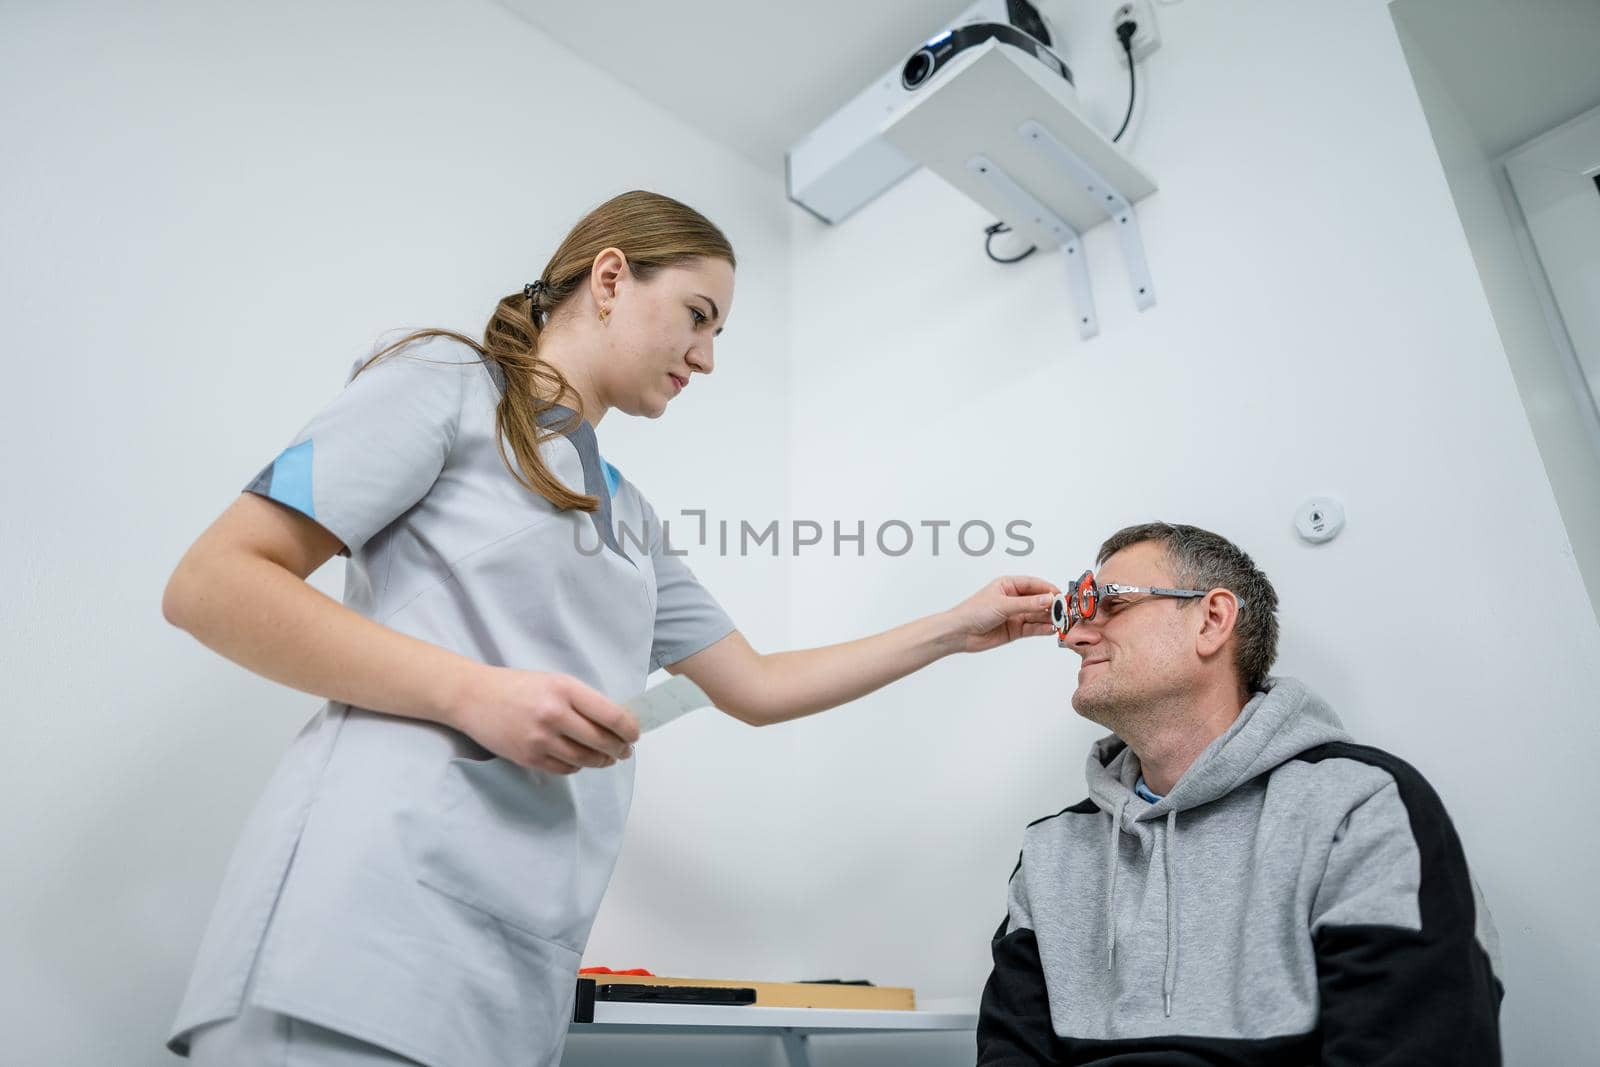 Vision correction. Selection of eyeglasses. Professional trial frames on male patient face while doctor checks eyesight in modern ophthalmologist office. Optometrist checking prescription for glasses by Tomashevska